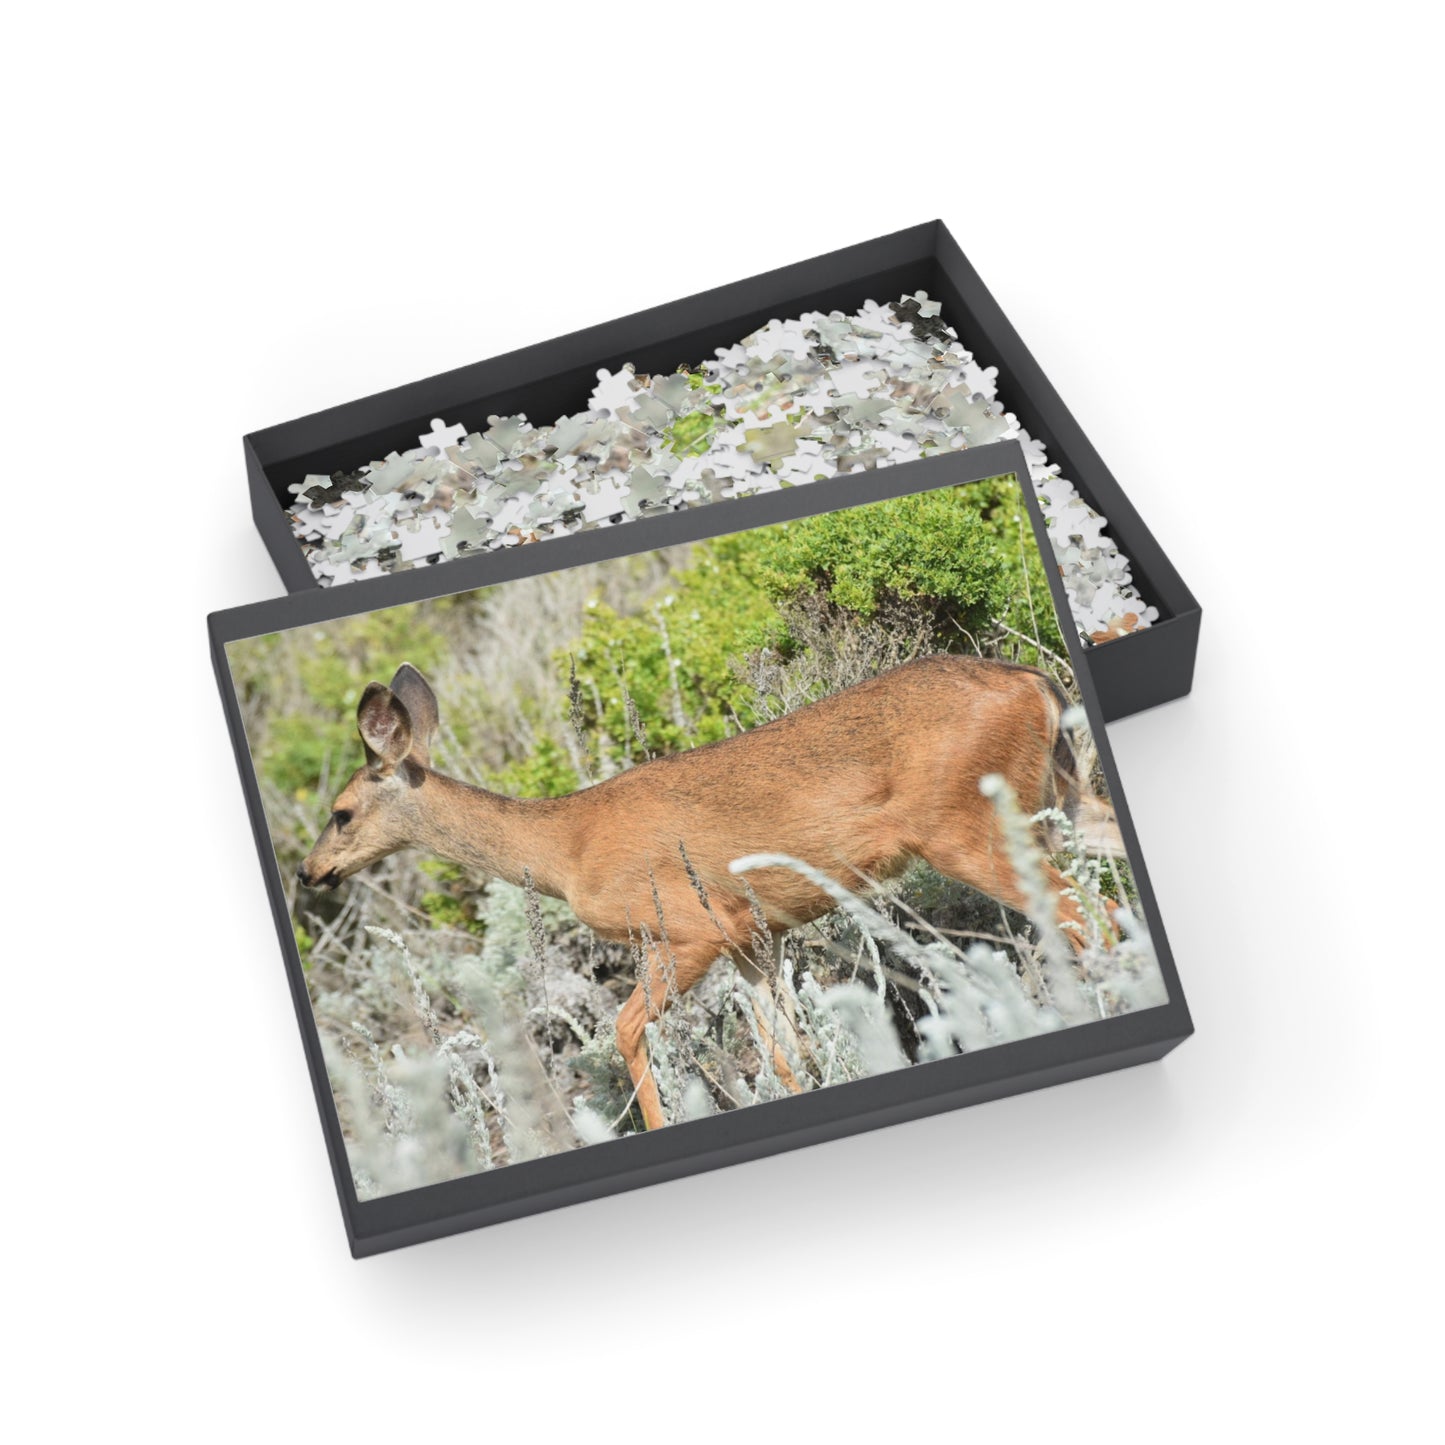 1000-Piece Mule Deer in Shrubbery Puzzle